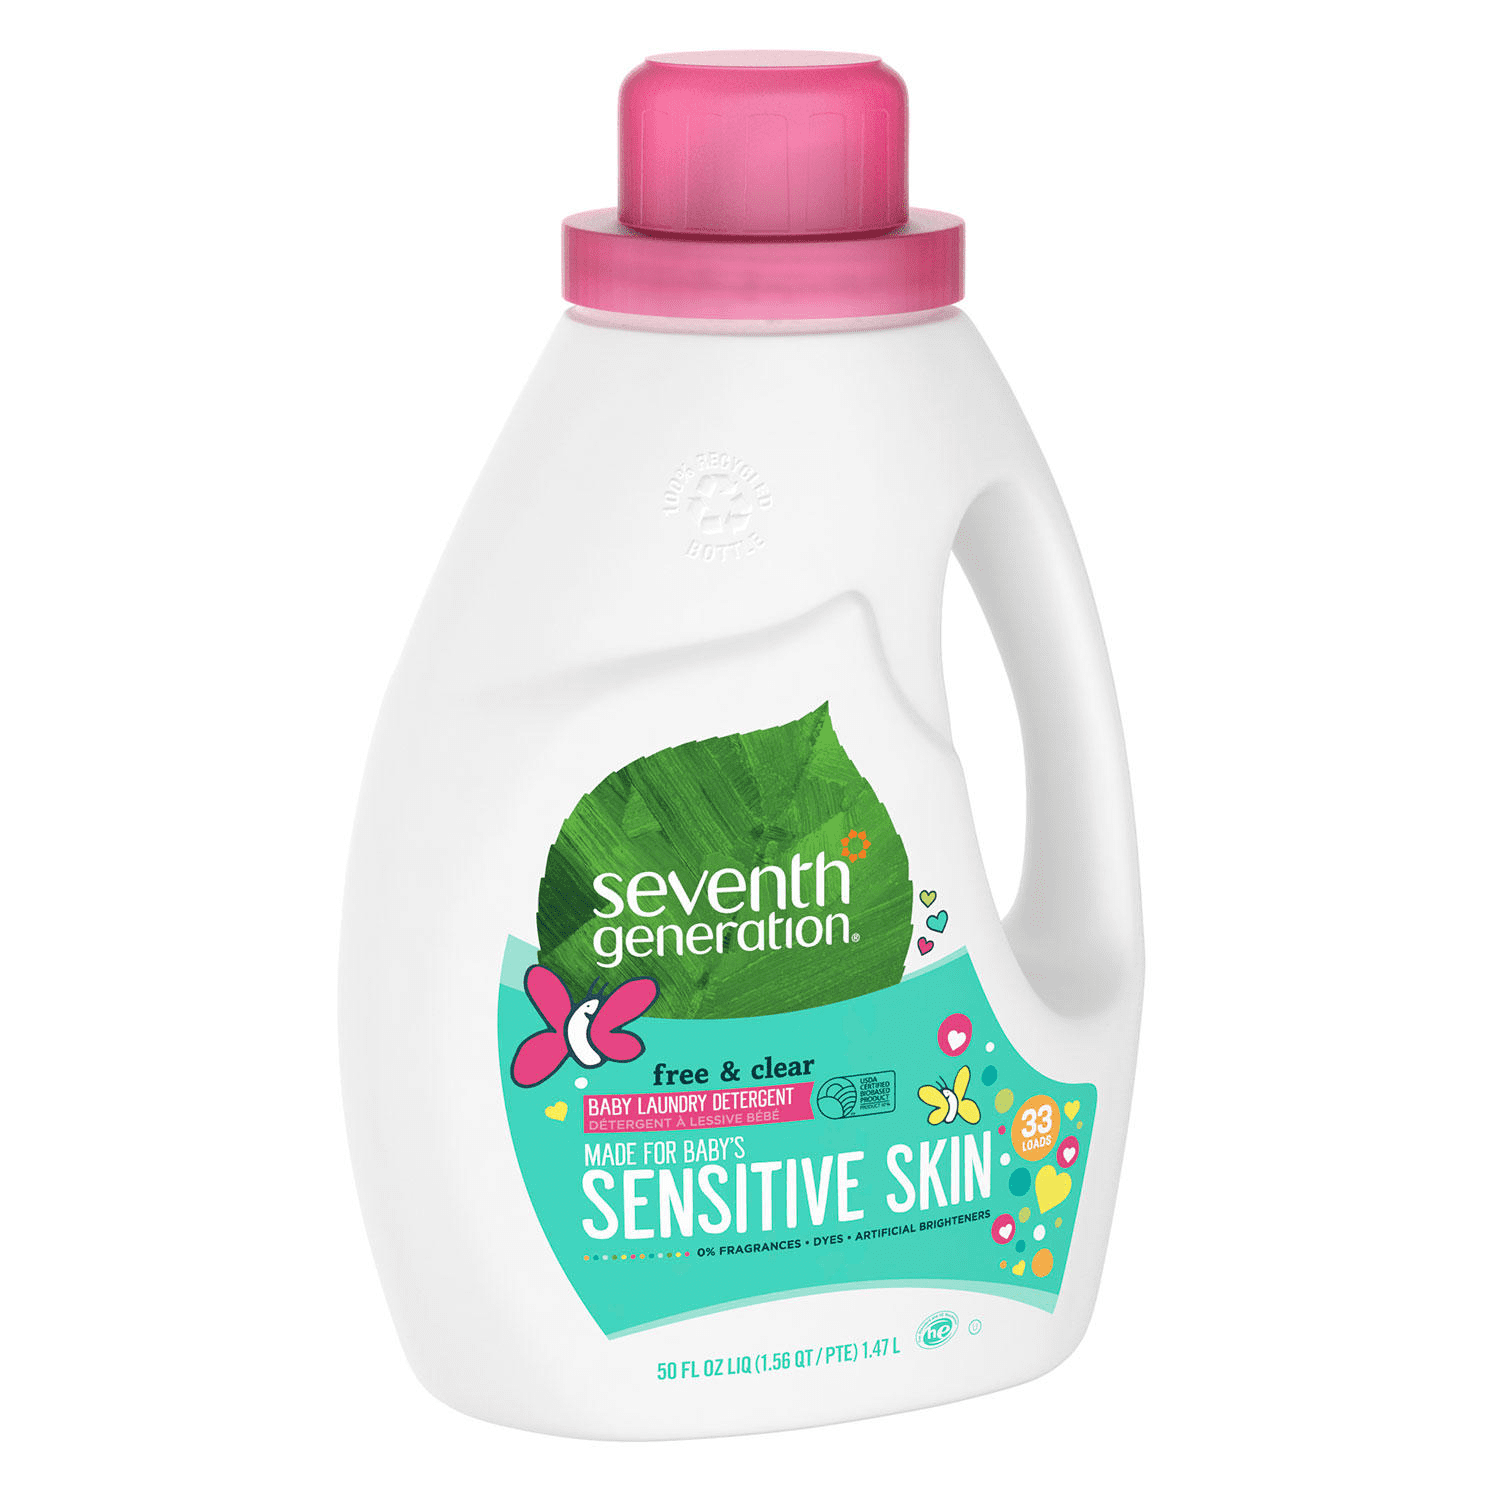 Extra-safe detergent for baby products – Herobility